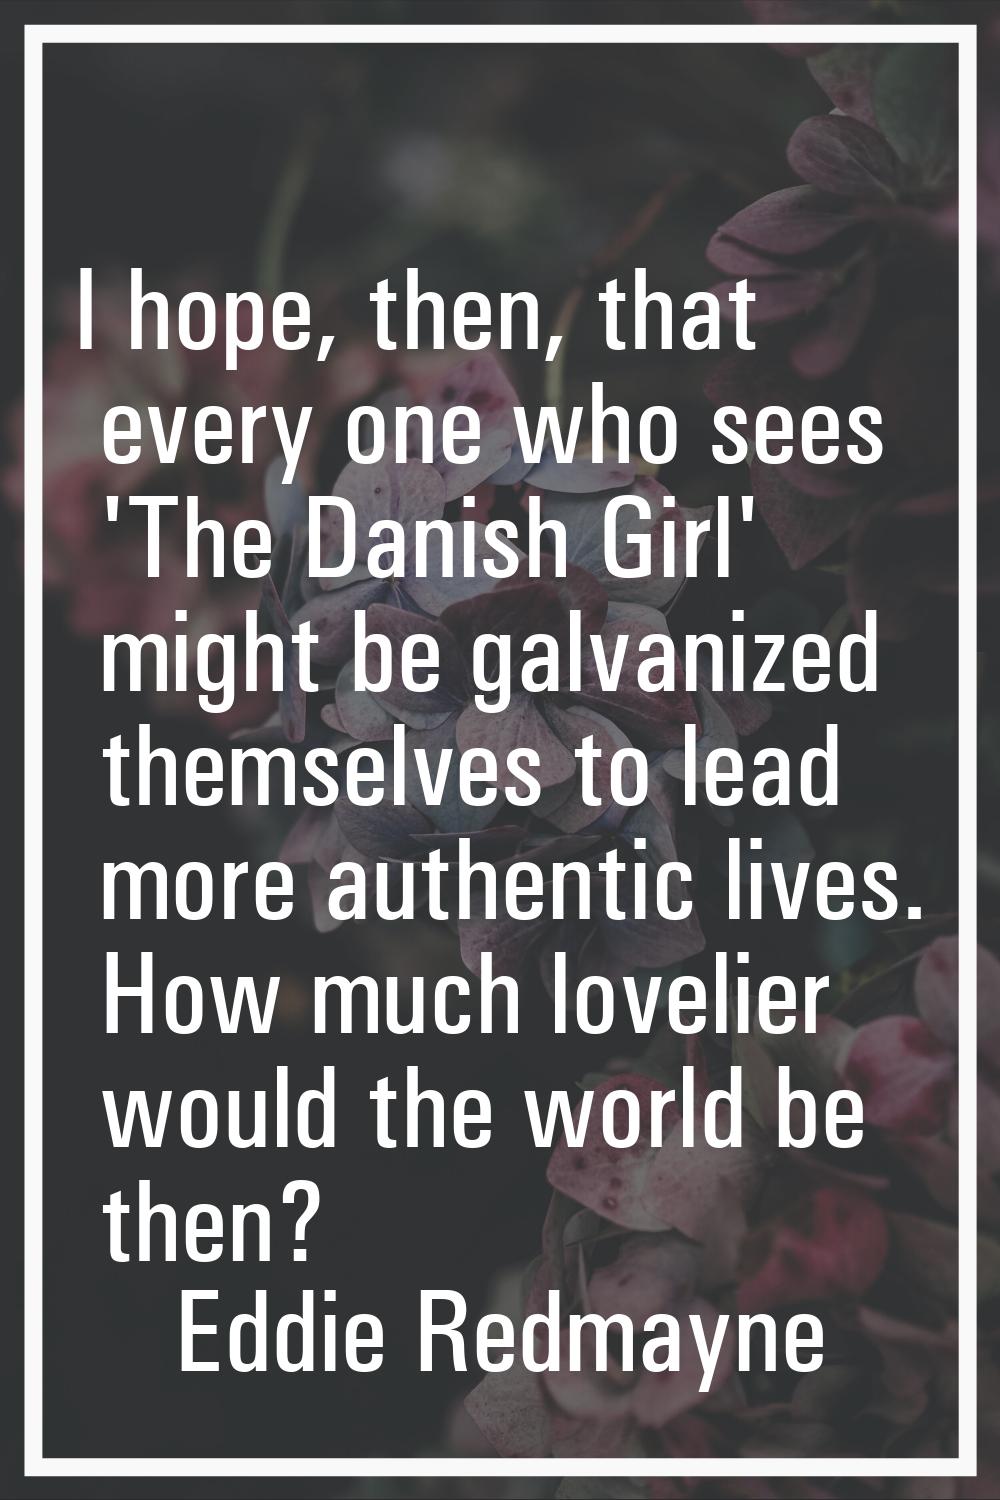 I hope, then, that every one who sees 'The Danish Girl' might be galvanized themselves to lead more